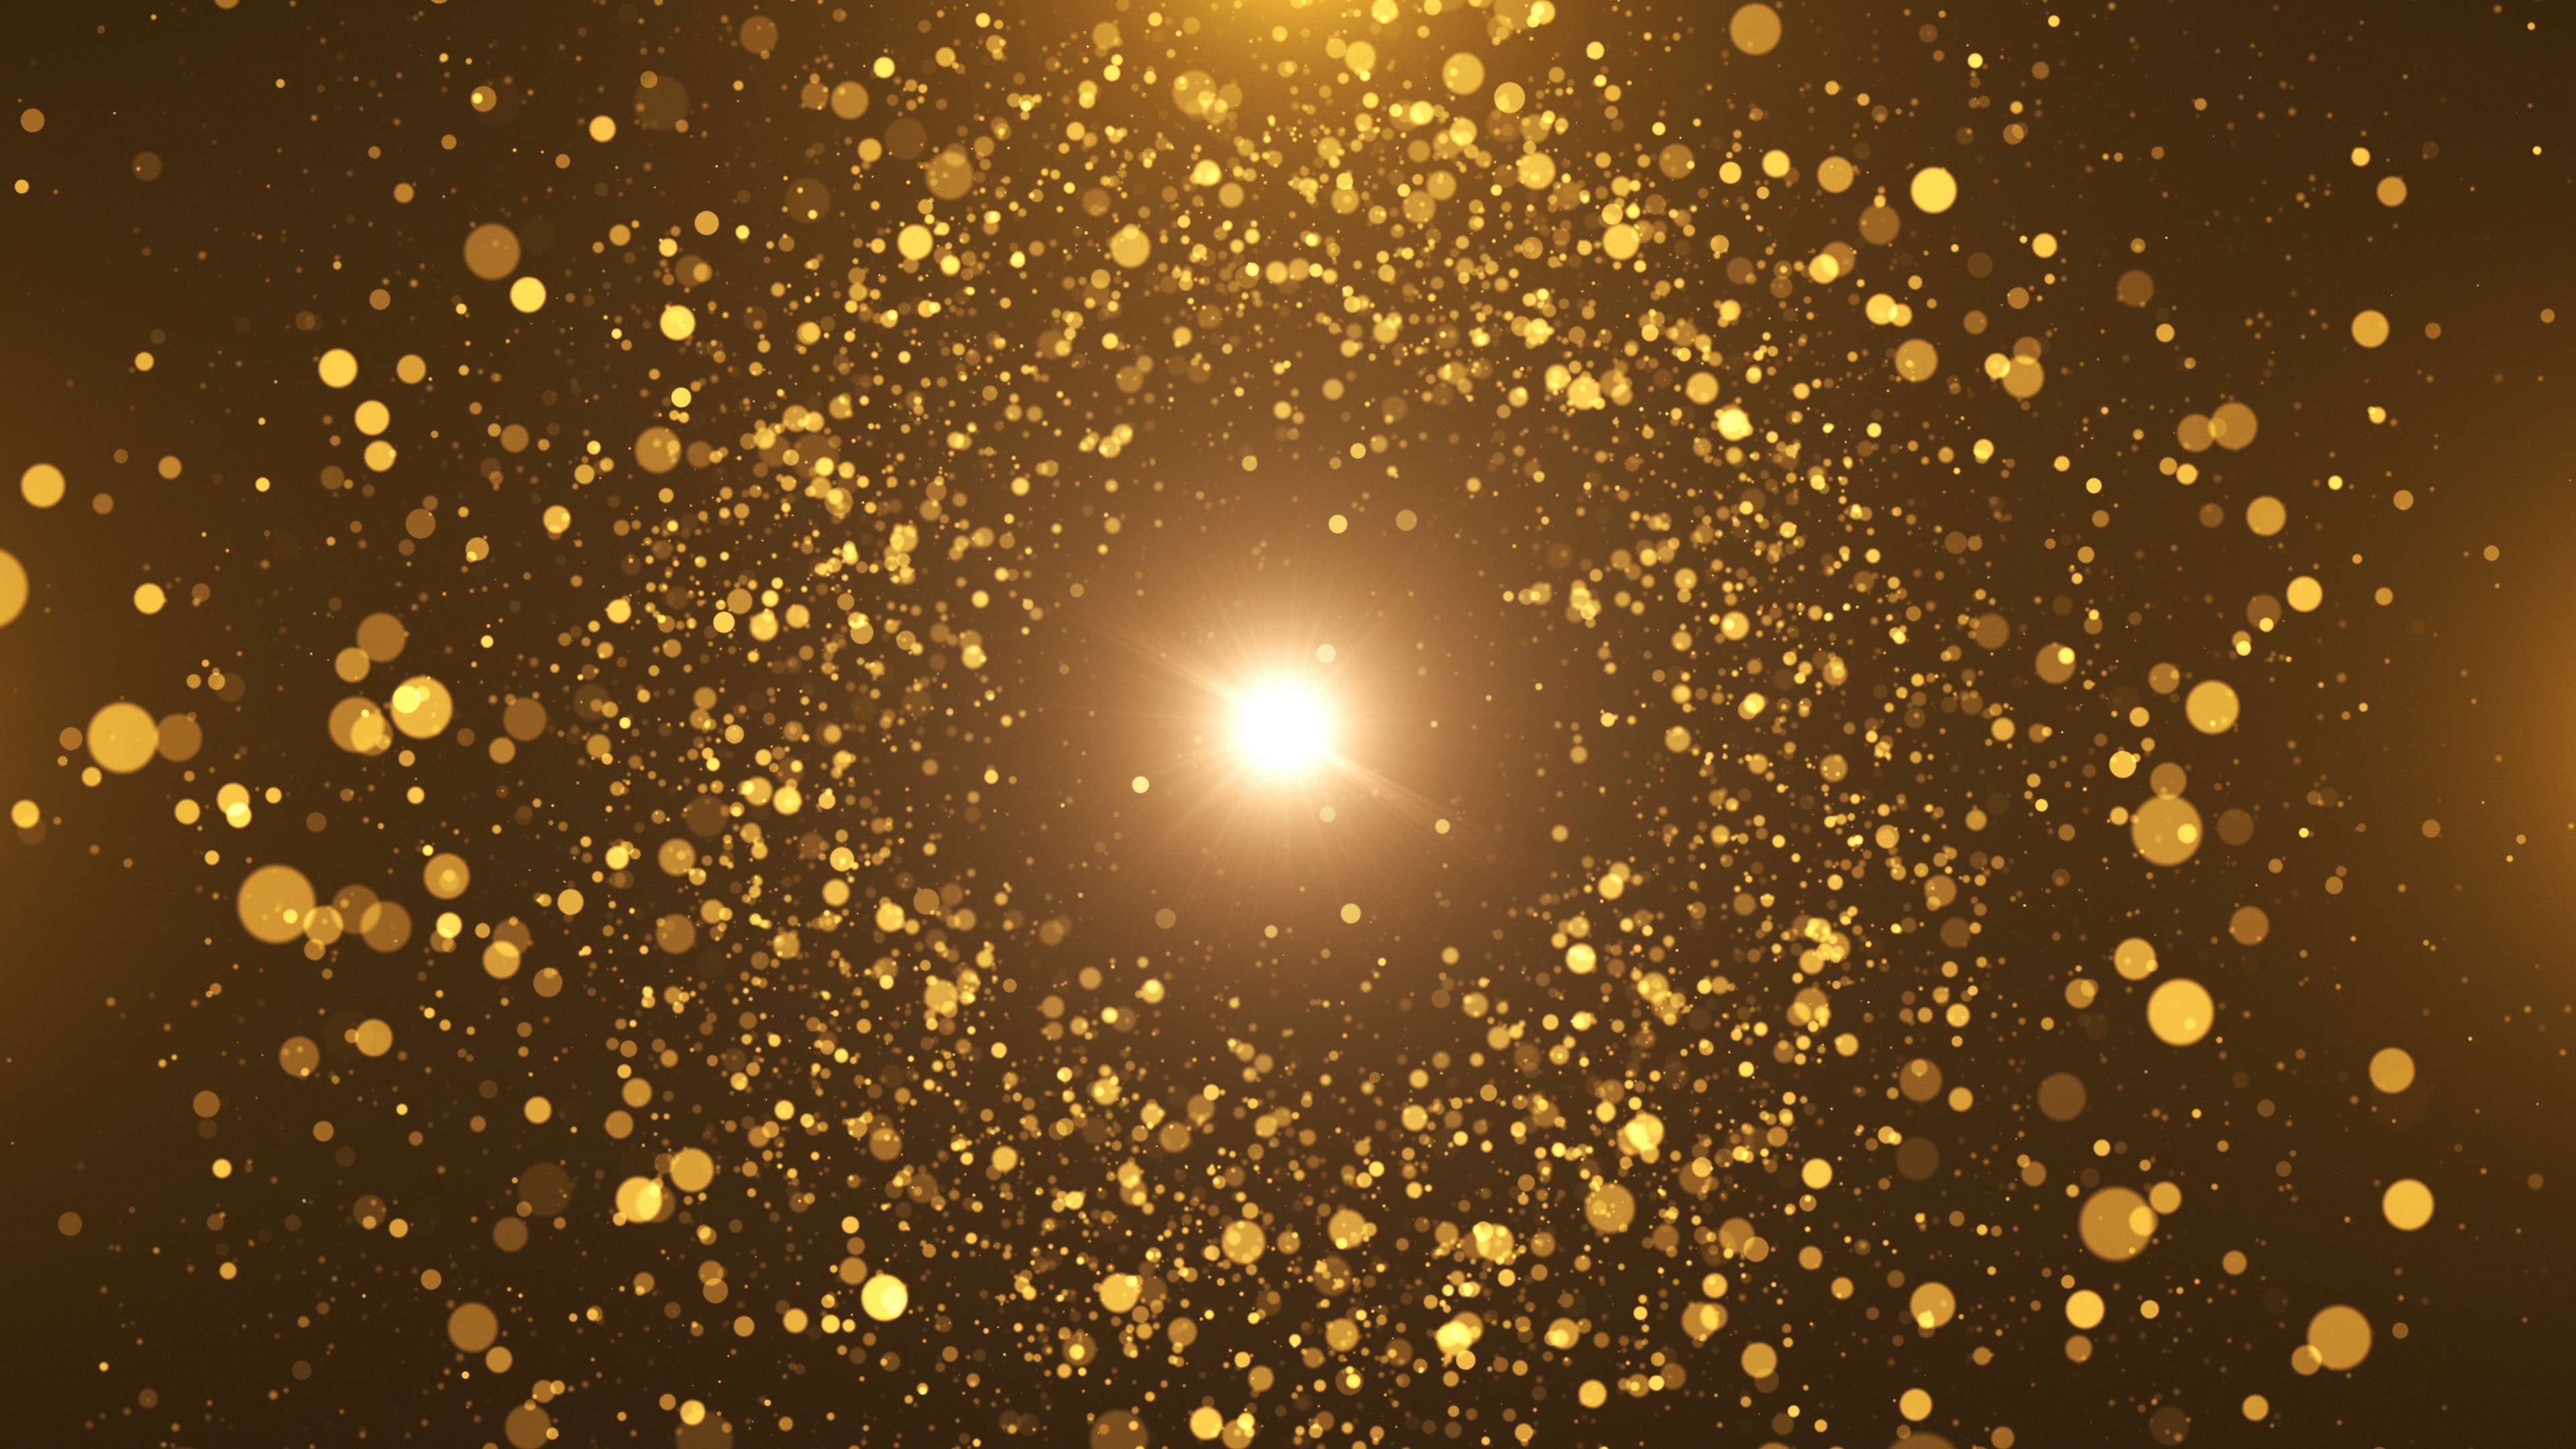 Gold Background, Lens Flare, Video Clip, Abstract, 3840x2160 4K Desktop